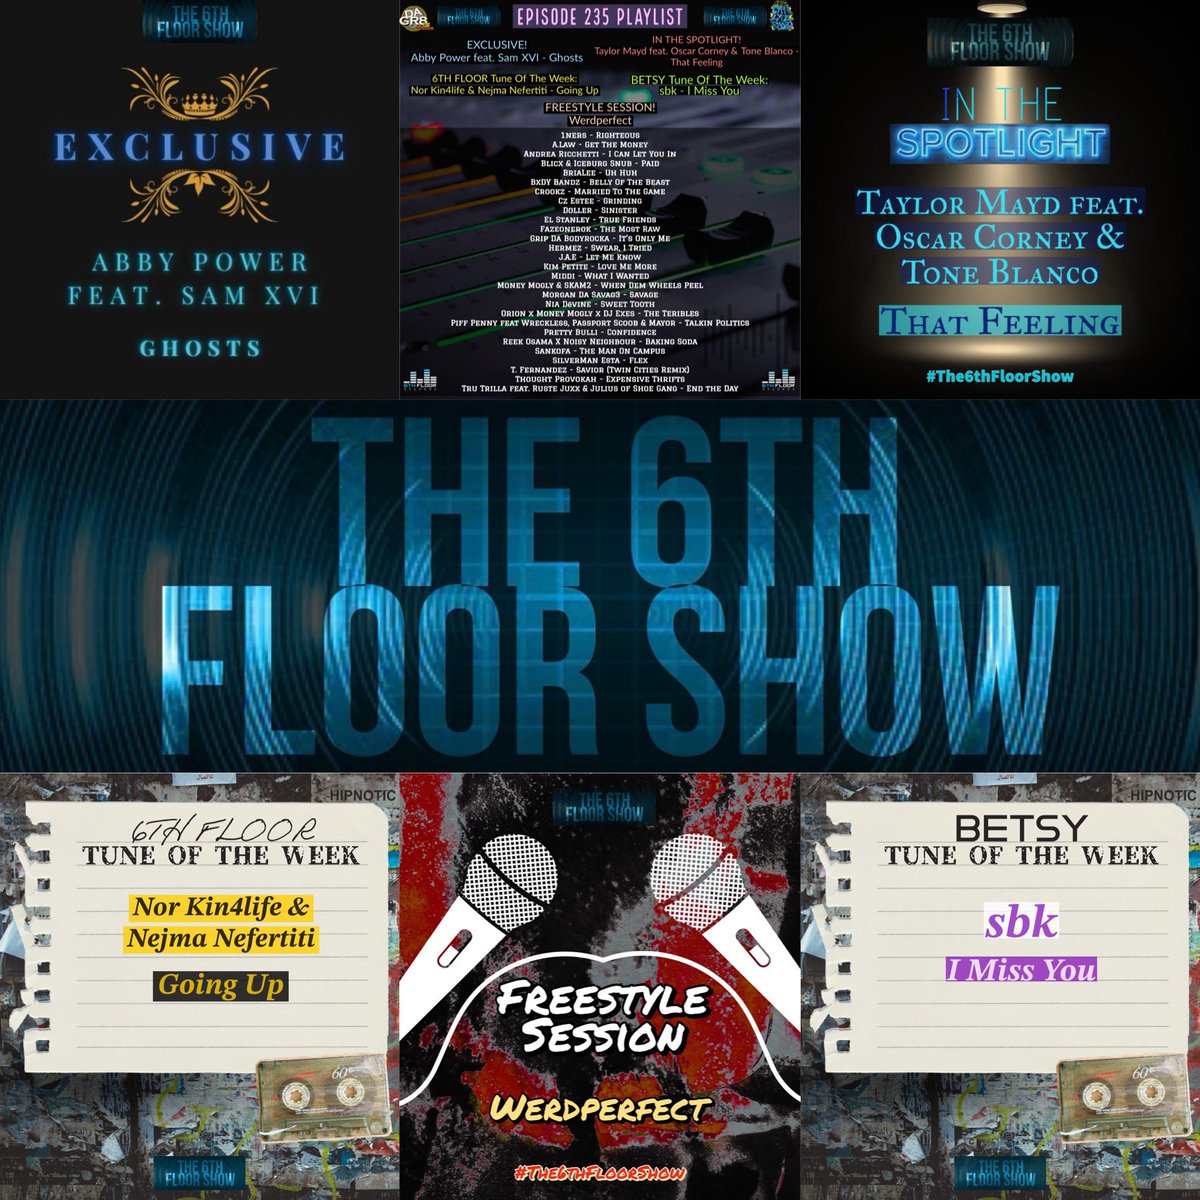 Brand new episode available today #The6thFloorShow podcasts.apple.com/gb/podcast/the… music.amazon.co.uk/podcasts/cde4a… mediafire.com/file/s9jzz0bdz… audiomack.com/the-6th-floor-… deezer.page.link/ogkuhKyqoWvWpx…